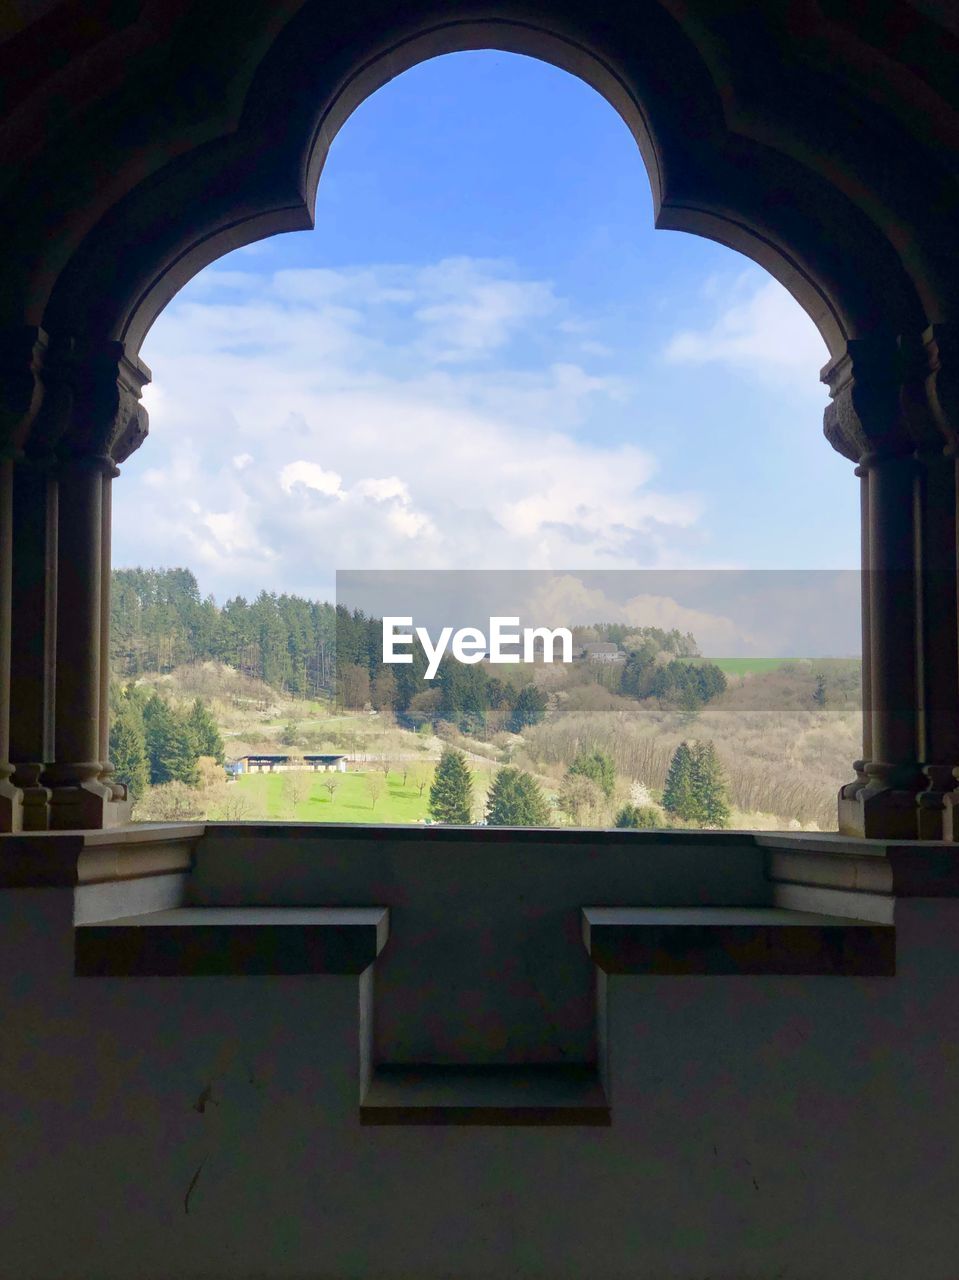 SCENIC VIEW OF MOUNTAINS SEEN THROUGH WINDOW